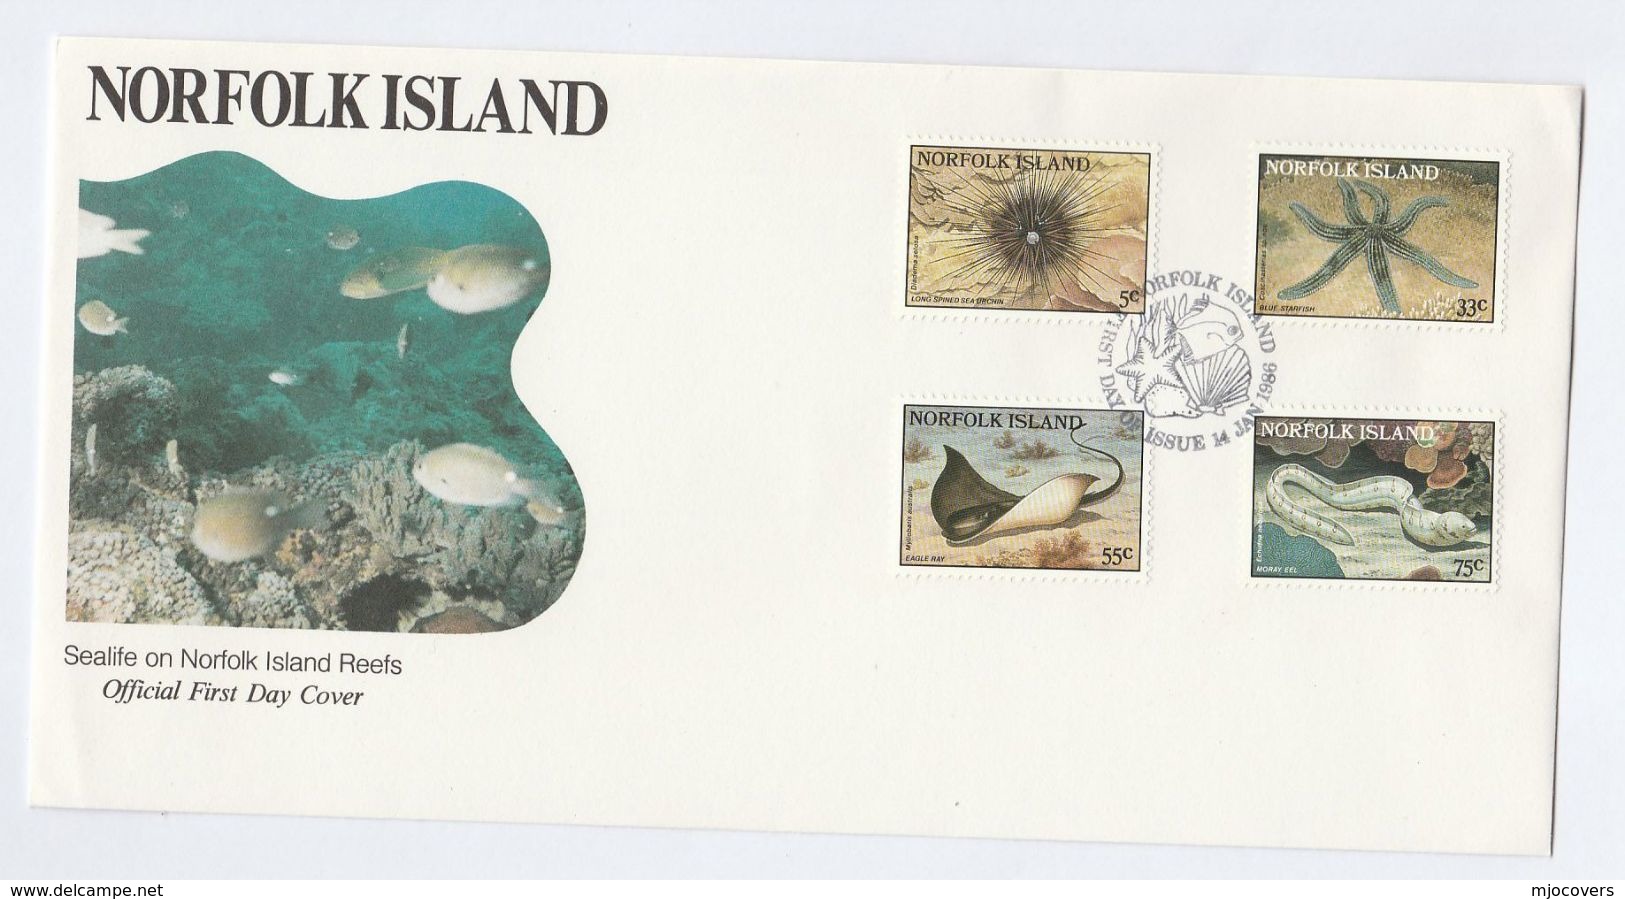 1986 NORFOLK ISLAND FDC Sealife FISH CORAL Cover Stamps - Fishes